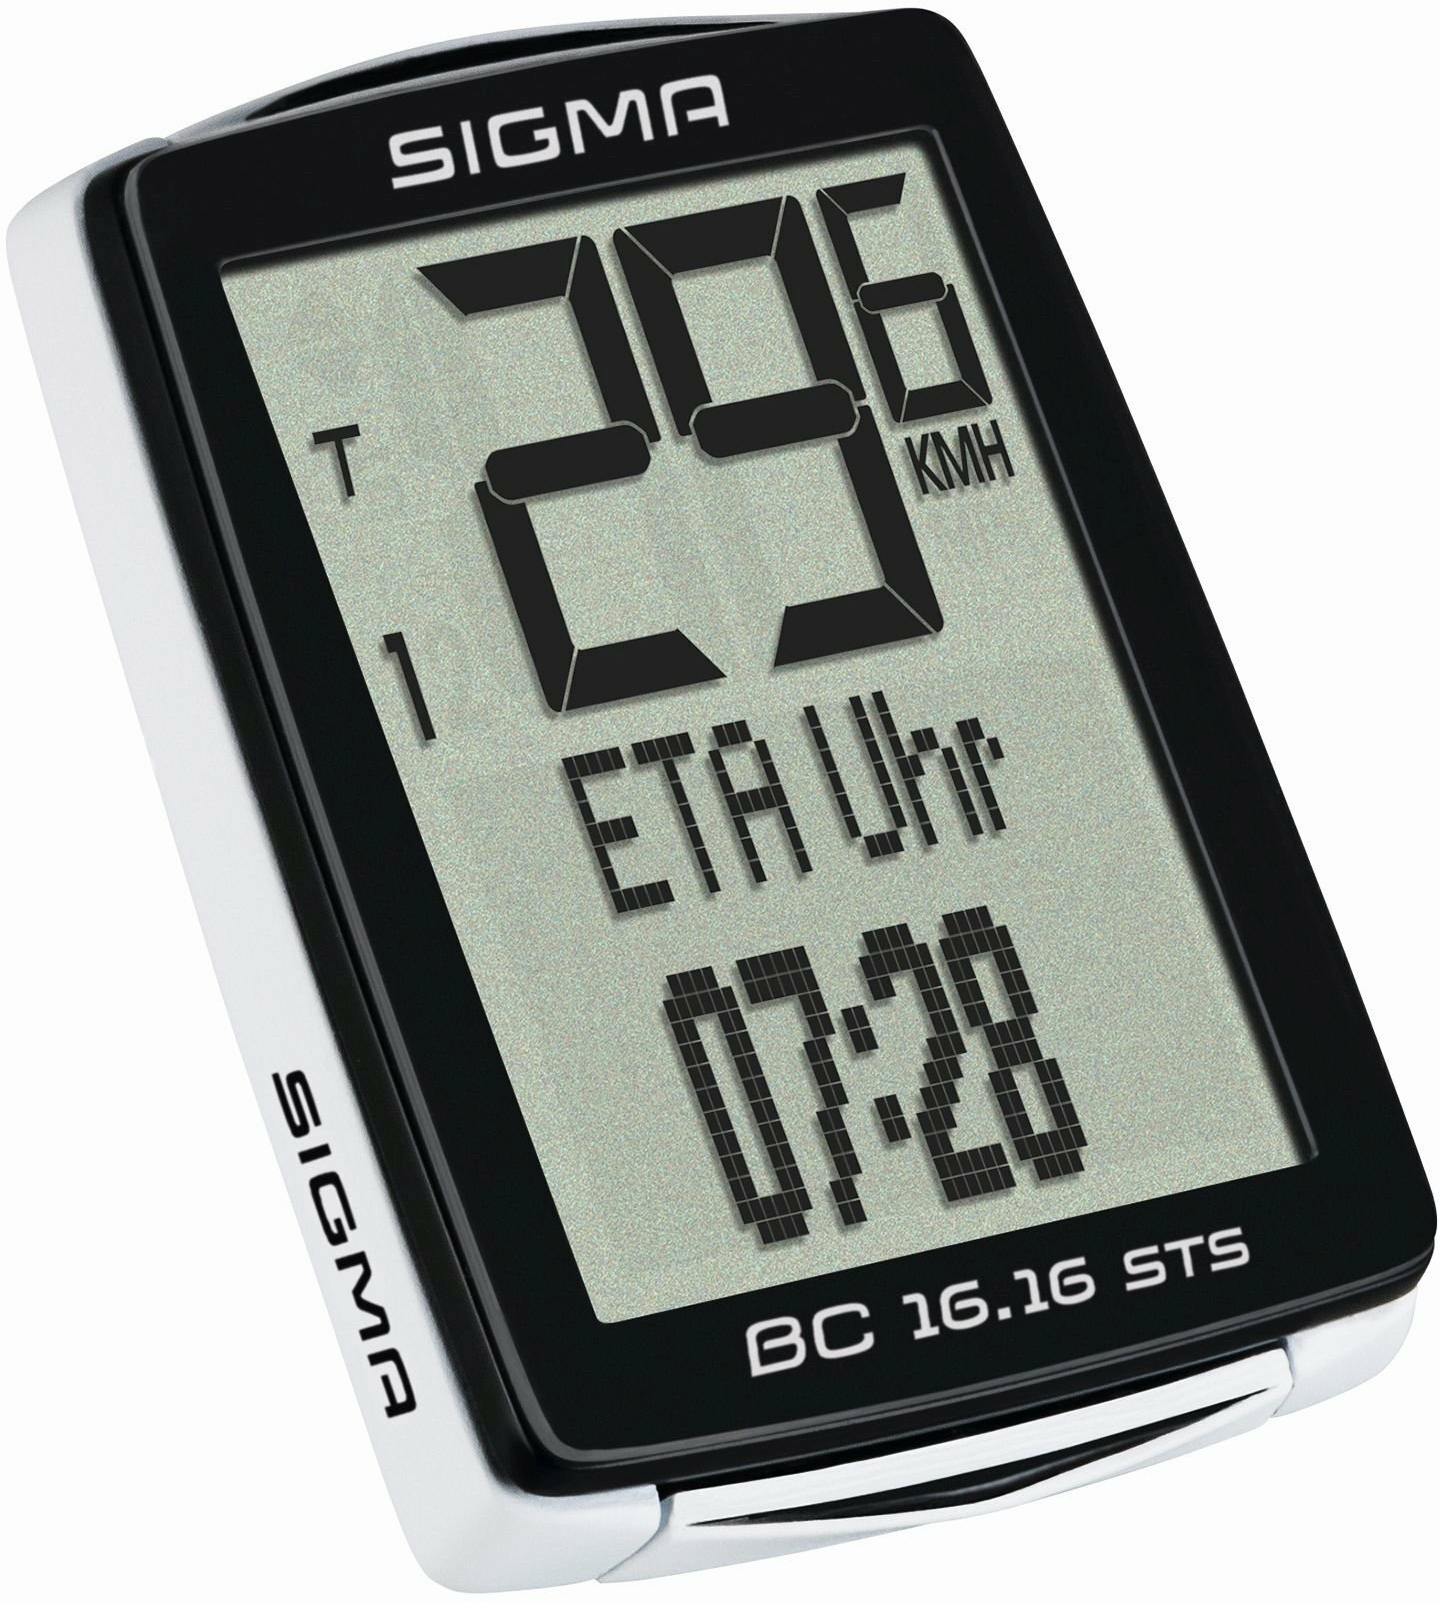 Sigma BC 16.16 STS CAD wireless Computer